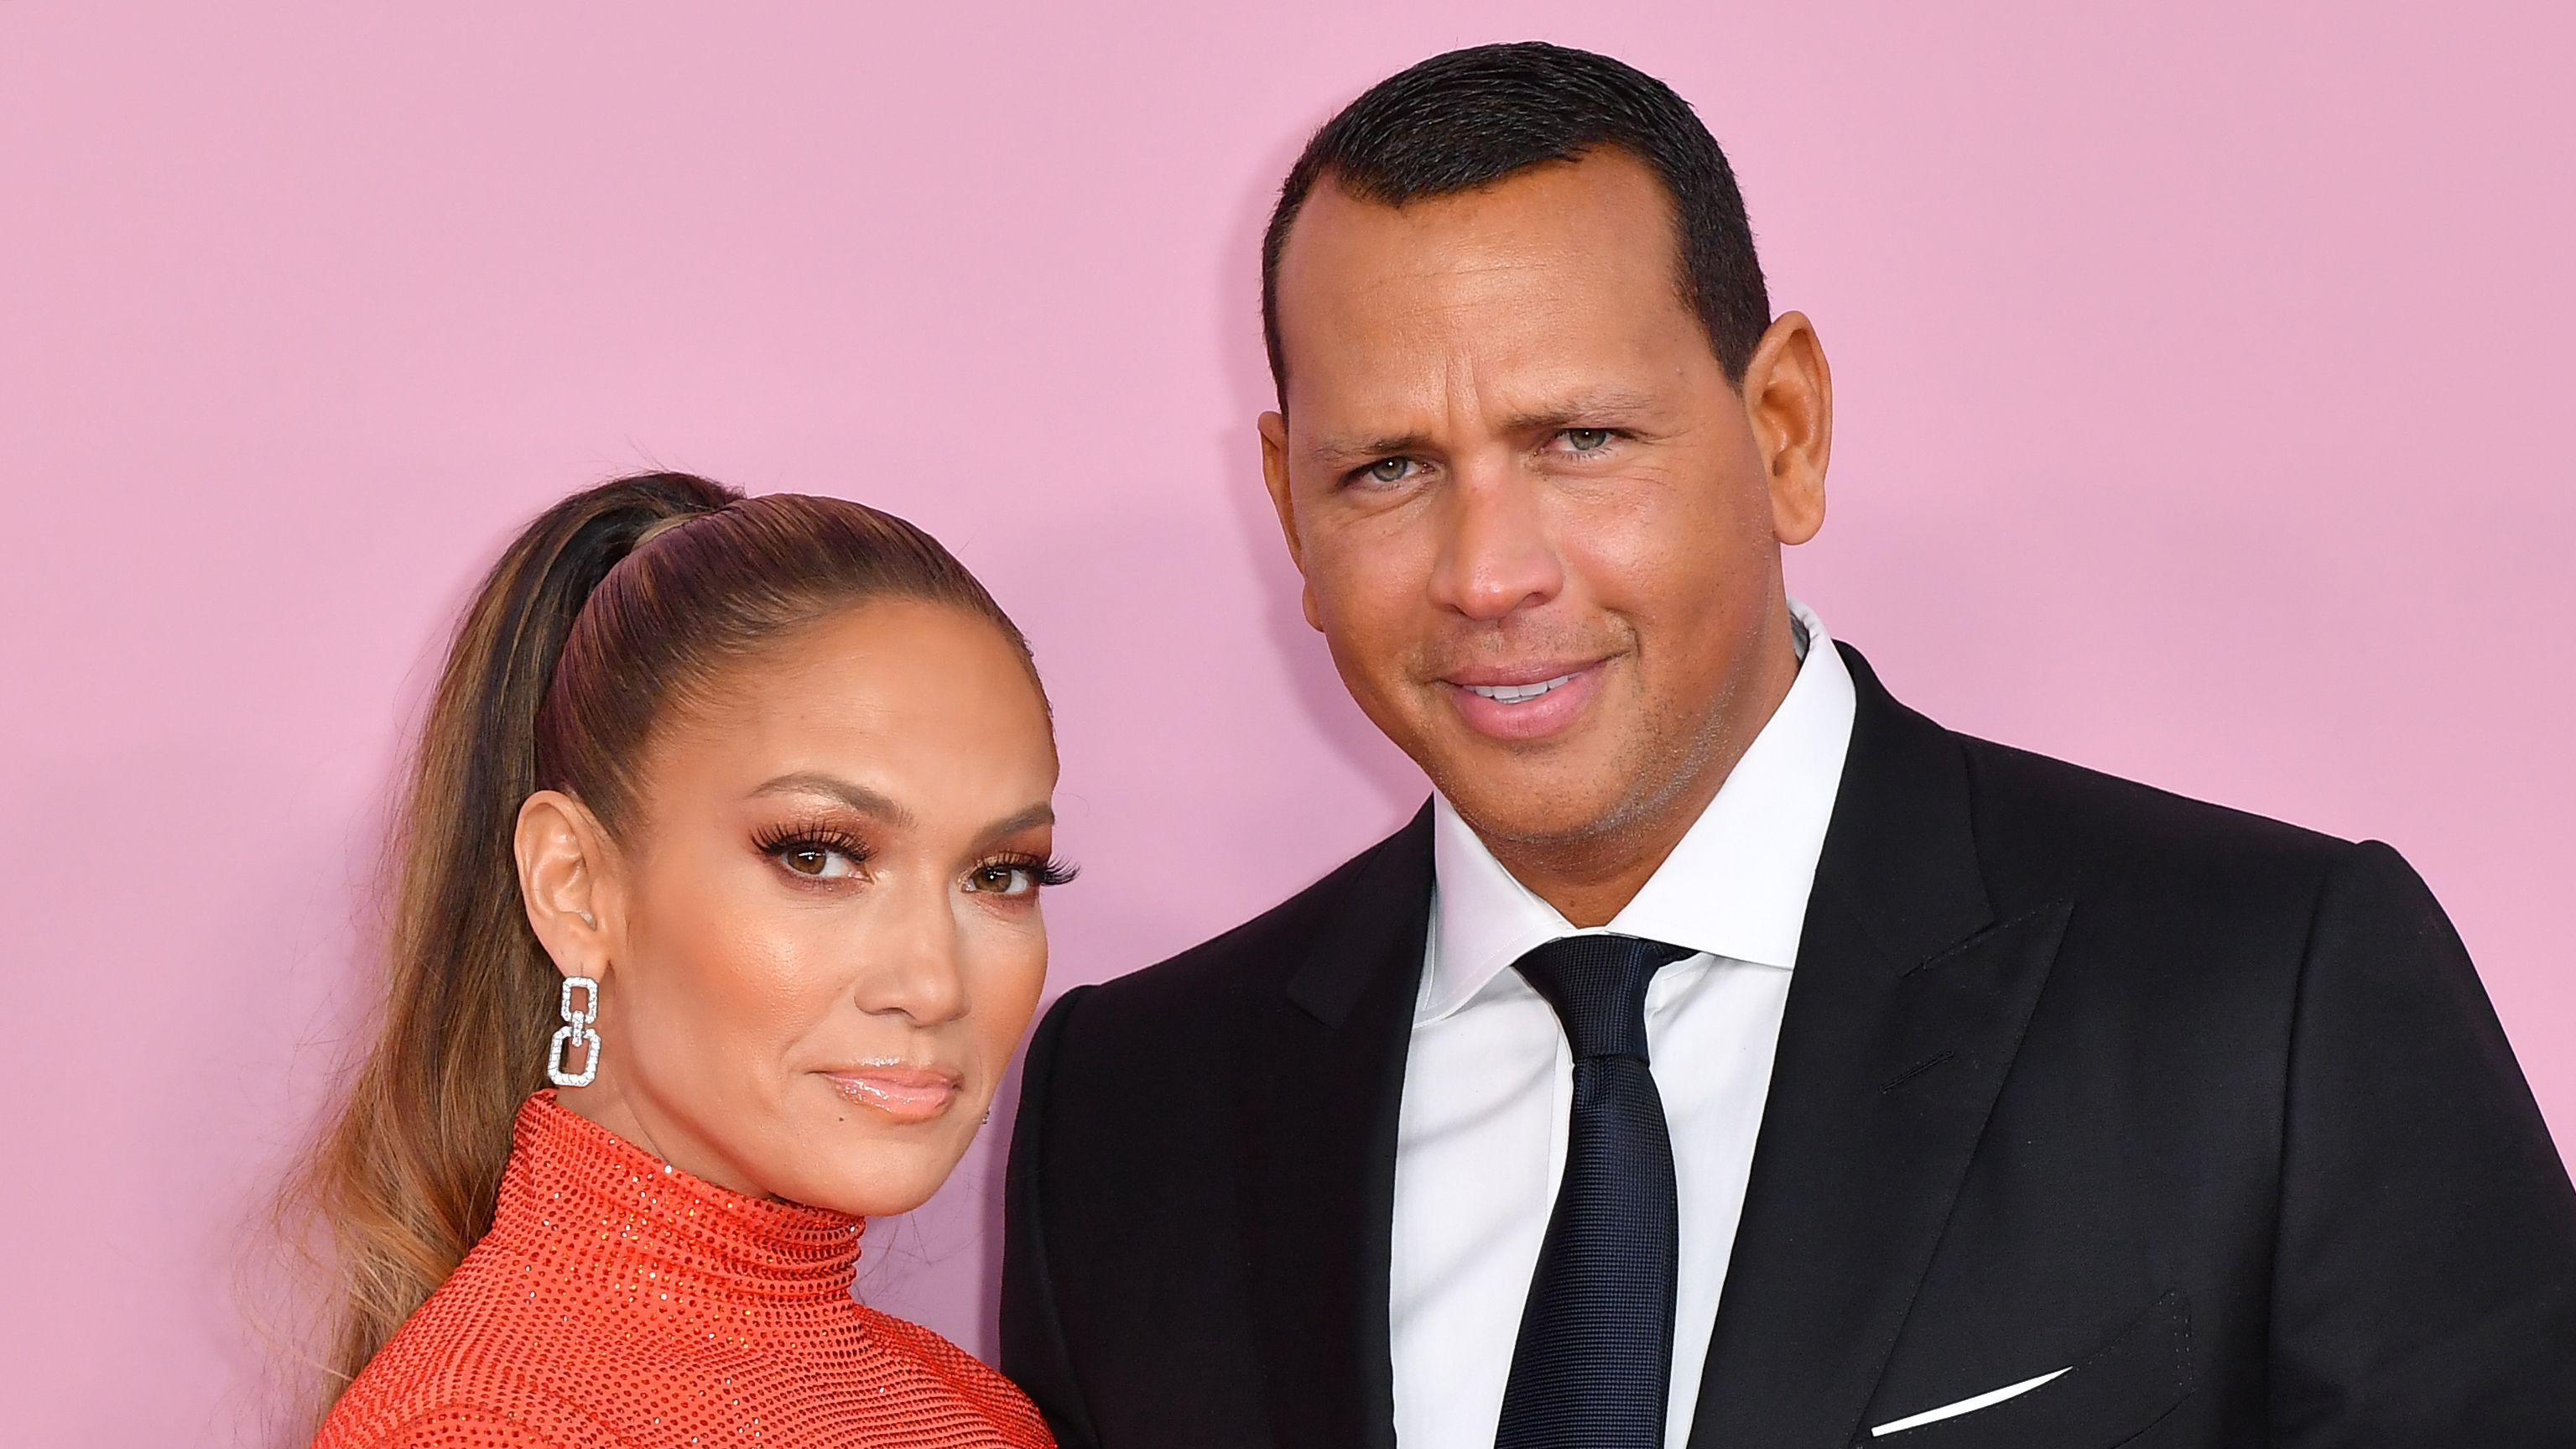 Here's What We Know About Alex Rodriguez's Makeup Company